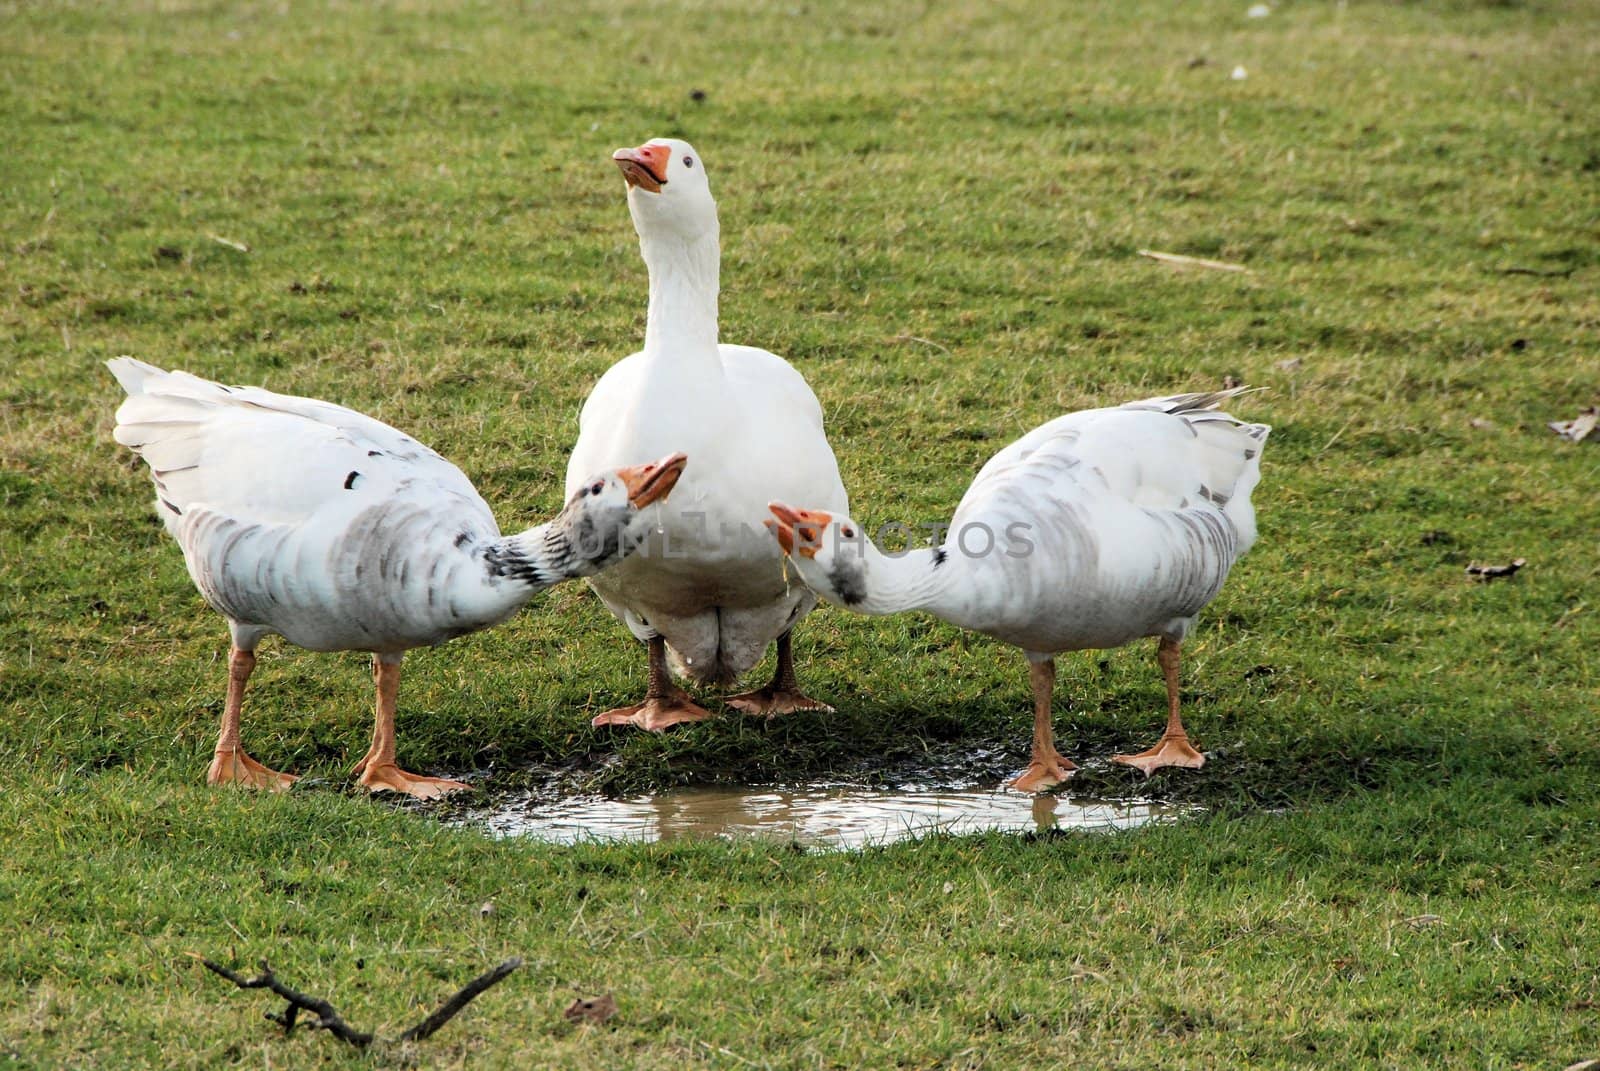 Three Geese taking a drink from a puddle in their field